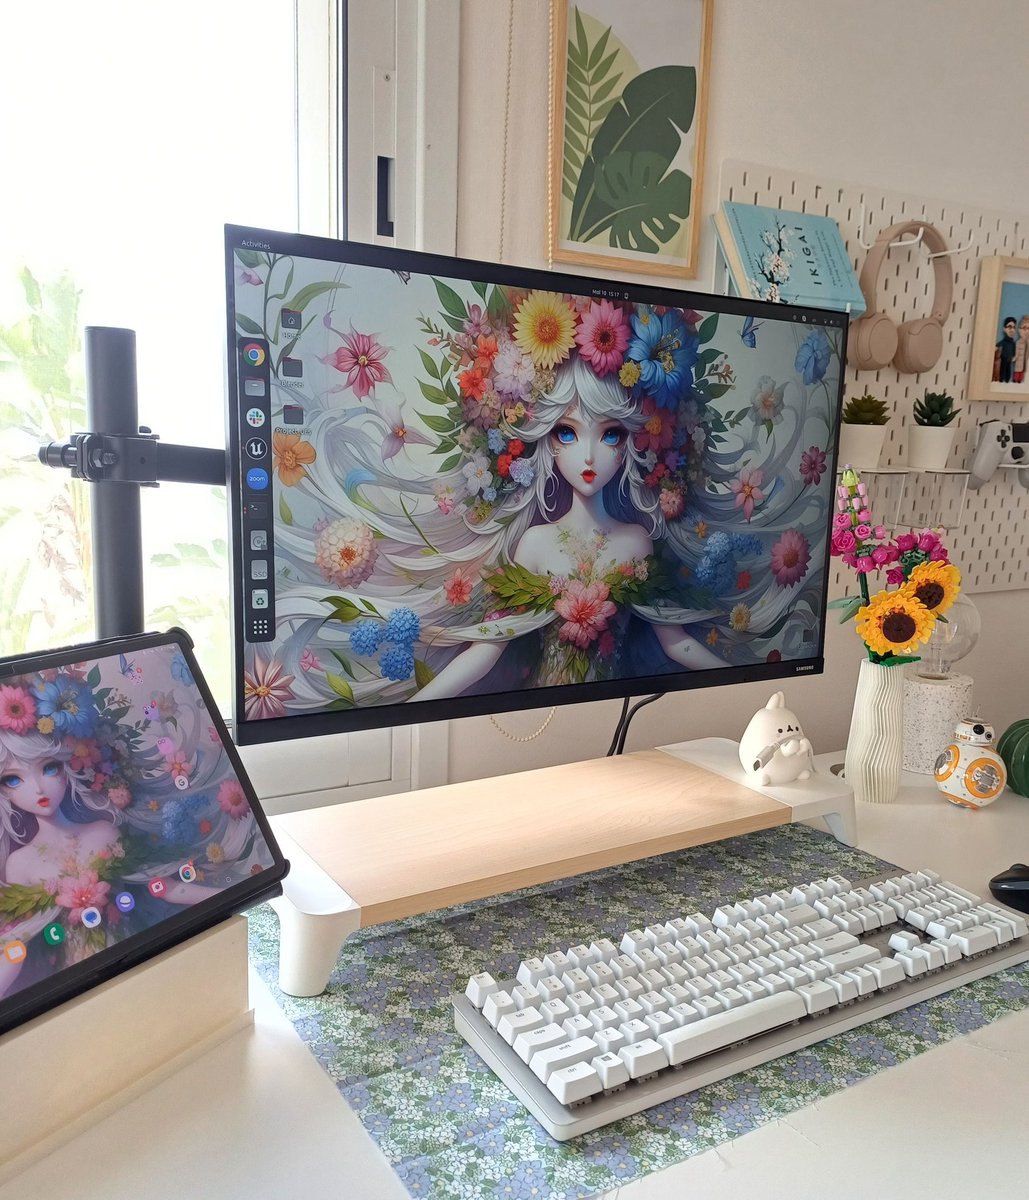 Good morning everyone 🌸🌻 When did you start coding for the first time? 

#cozy #cozyhome #cozydecor #desksetup #aesthetic #deskgoals #cozyvibes #cozyliving #deskspace #deskdecor #gamingsetup #gaming #gamingsetups